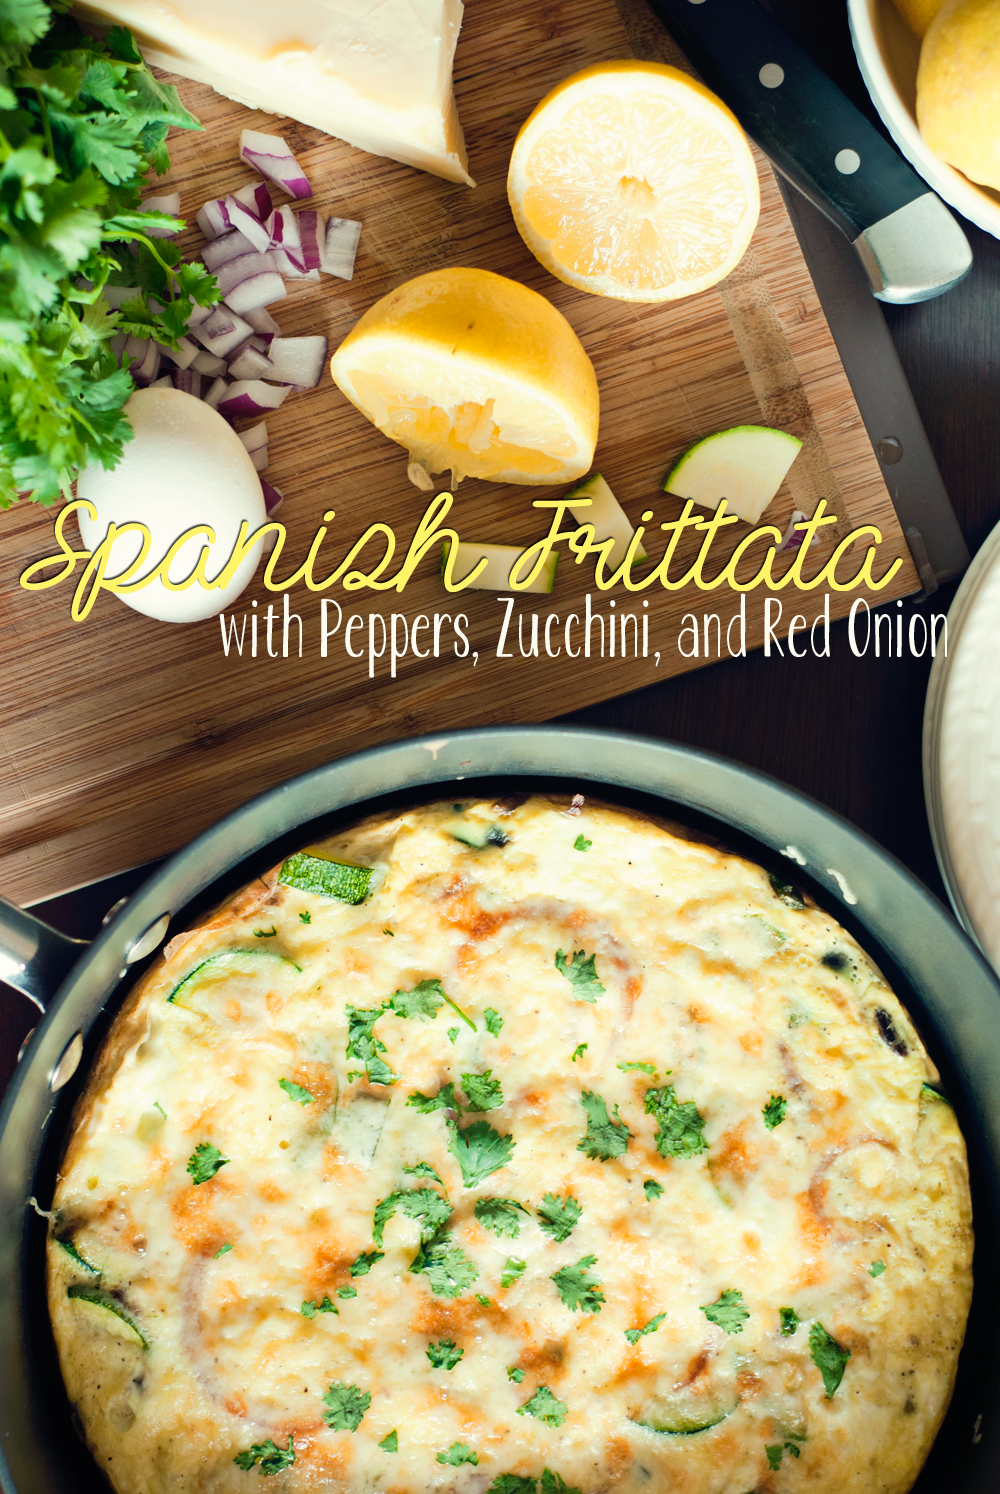 Spanish Frittata with Peppers, Zucchini, and Red Onion by Three in Three #TabletheSalt #sp